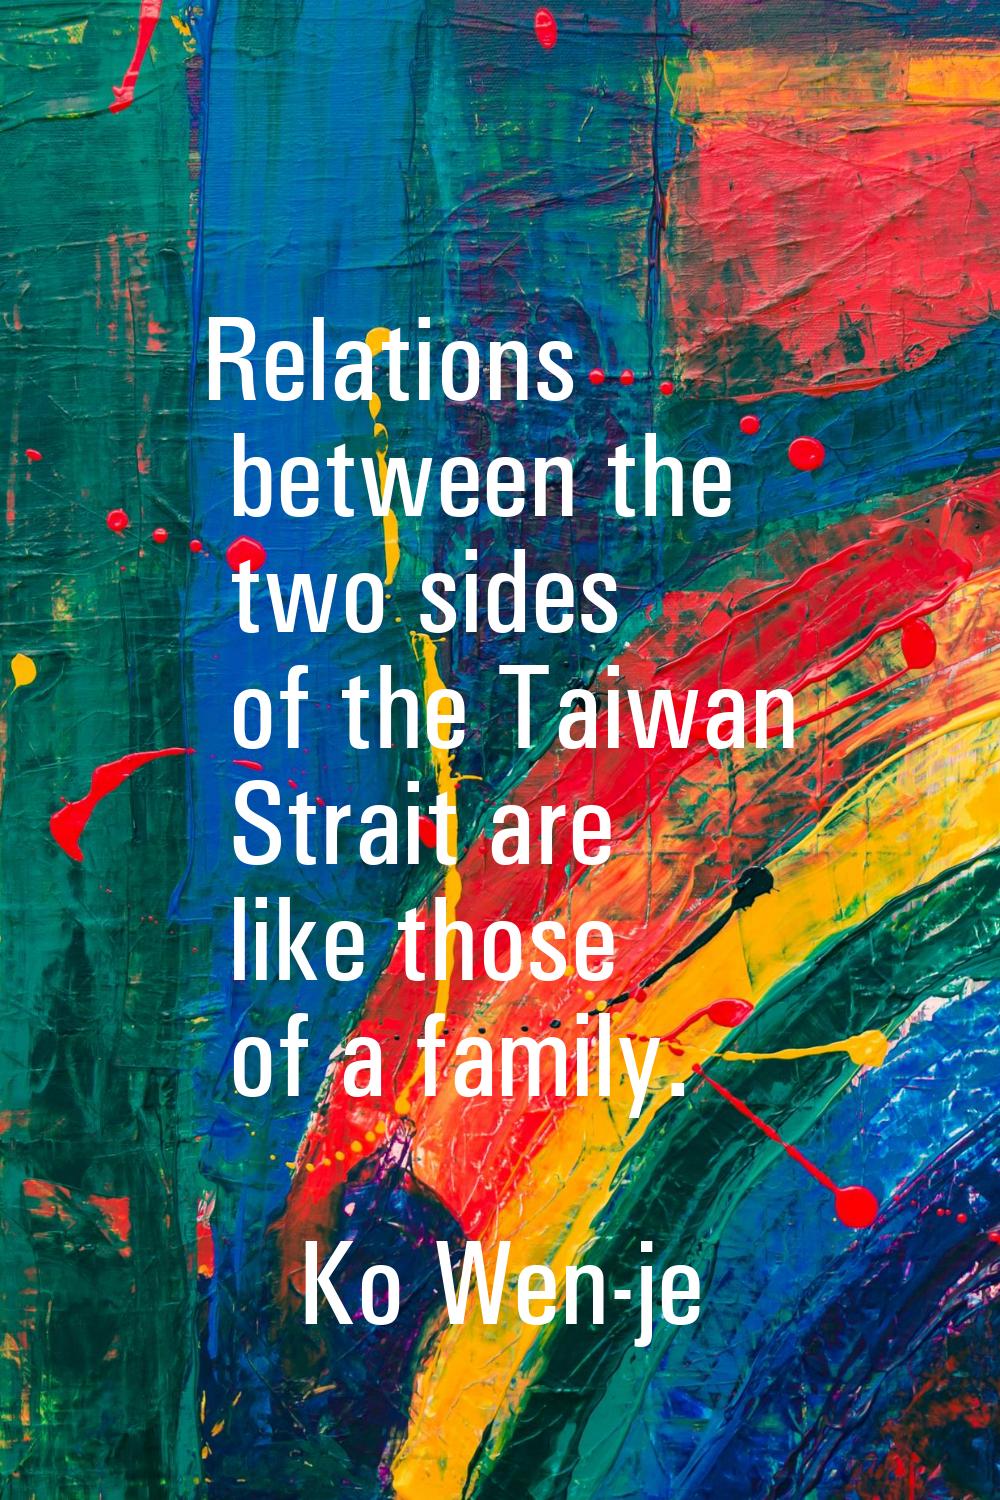 Relations between the two sides of the Taiwan Strait are like those of a family.